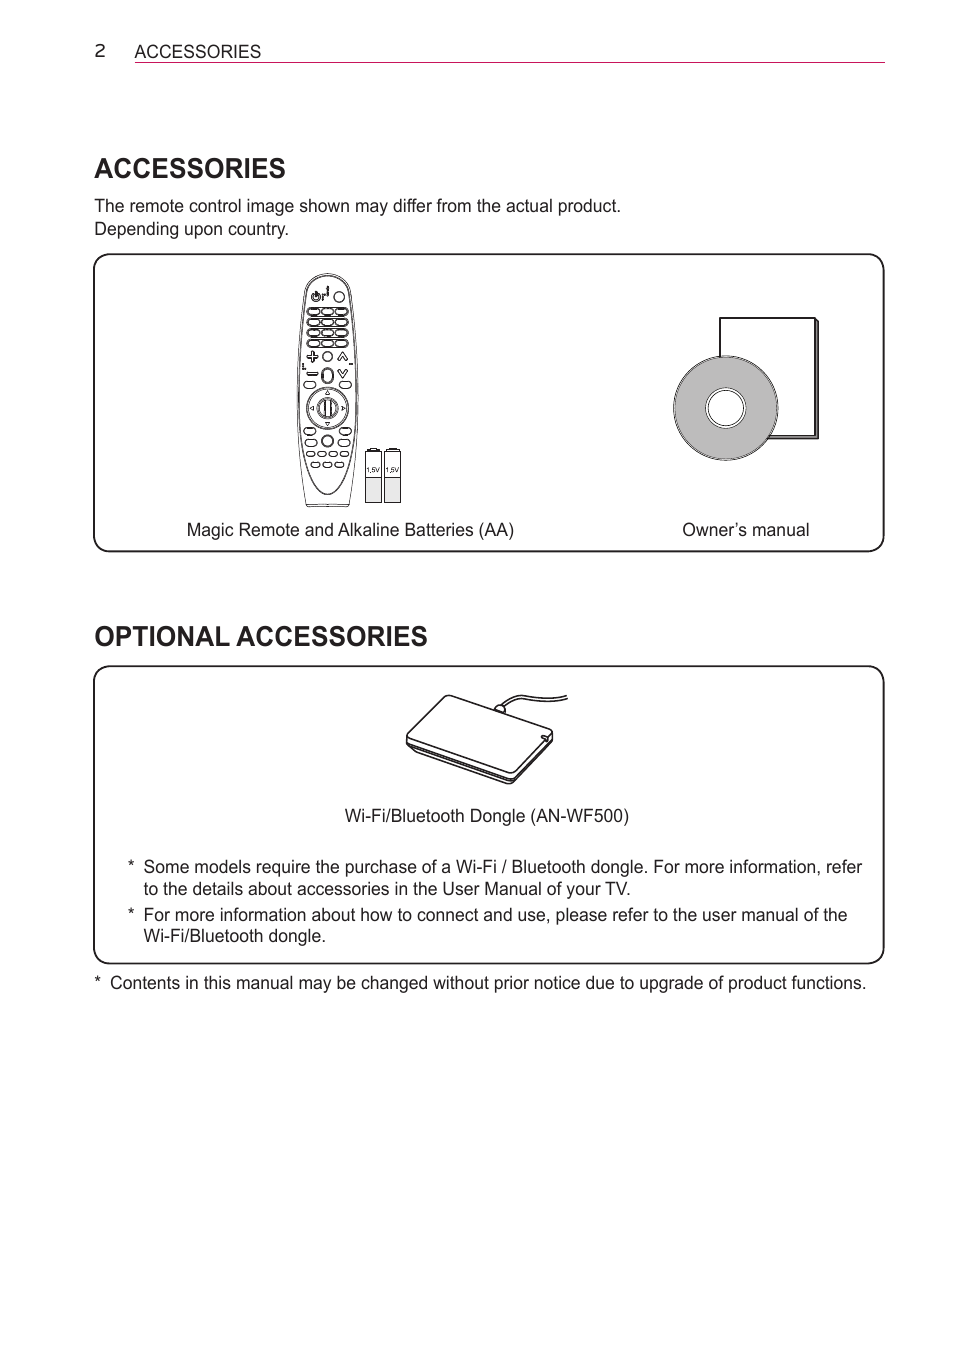 Accessories, Optional accessories, Remote description 4 using 7 | Precautions to take 9 specifications 10 | LG AN-MR600 User Manual | Page 2 / 11